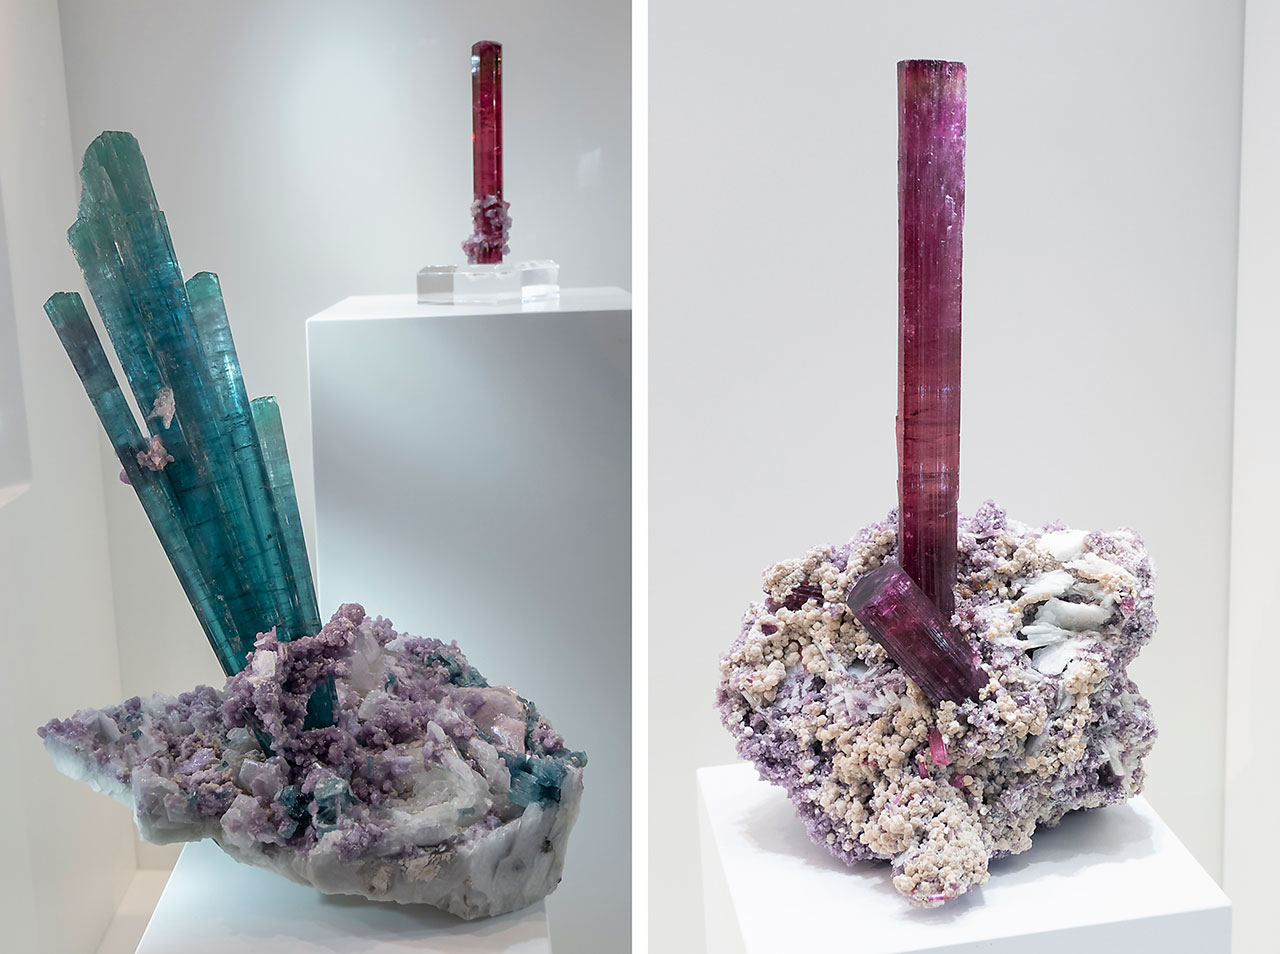 Excellent crystals of colorful lithium tourmalines from Minas Gerais, Brazil